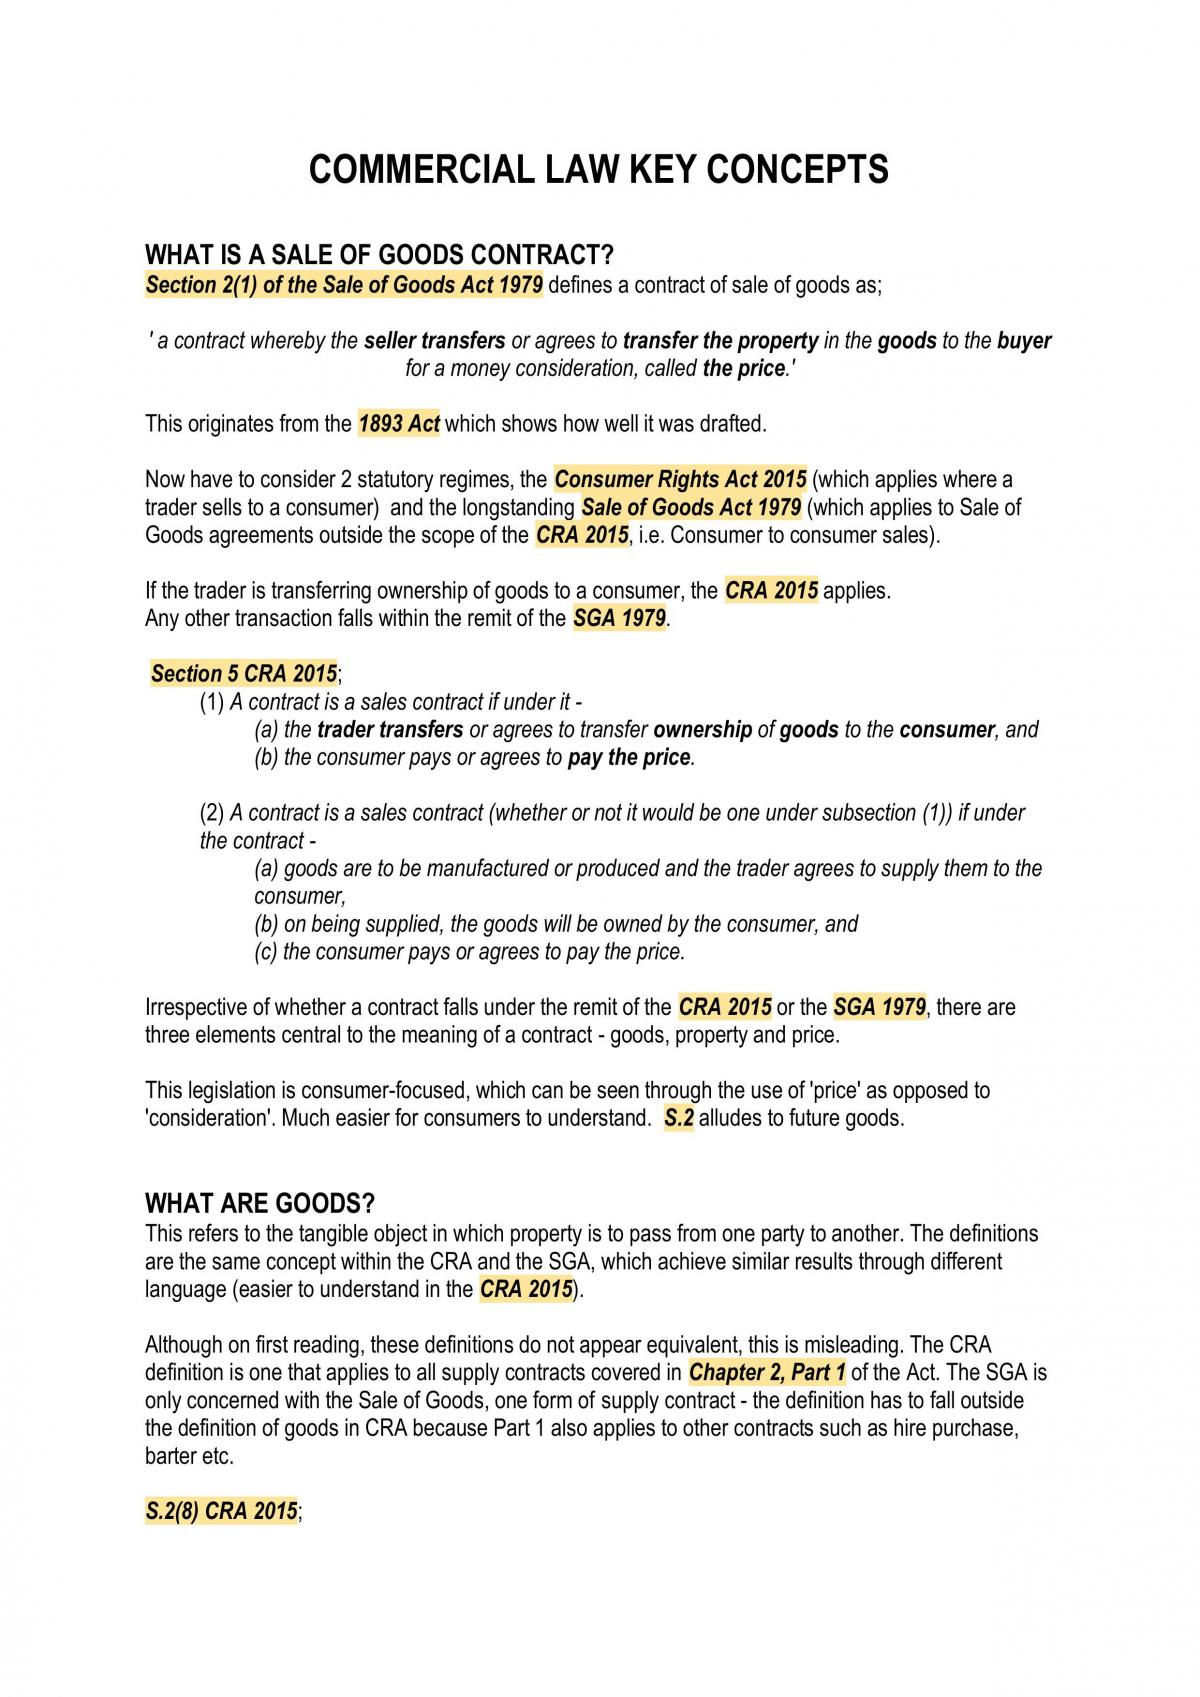 LAW318: Commercial Law Study Notes - Page 1